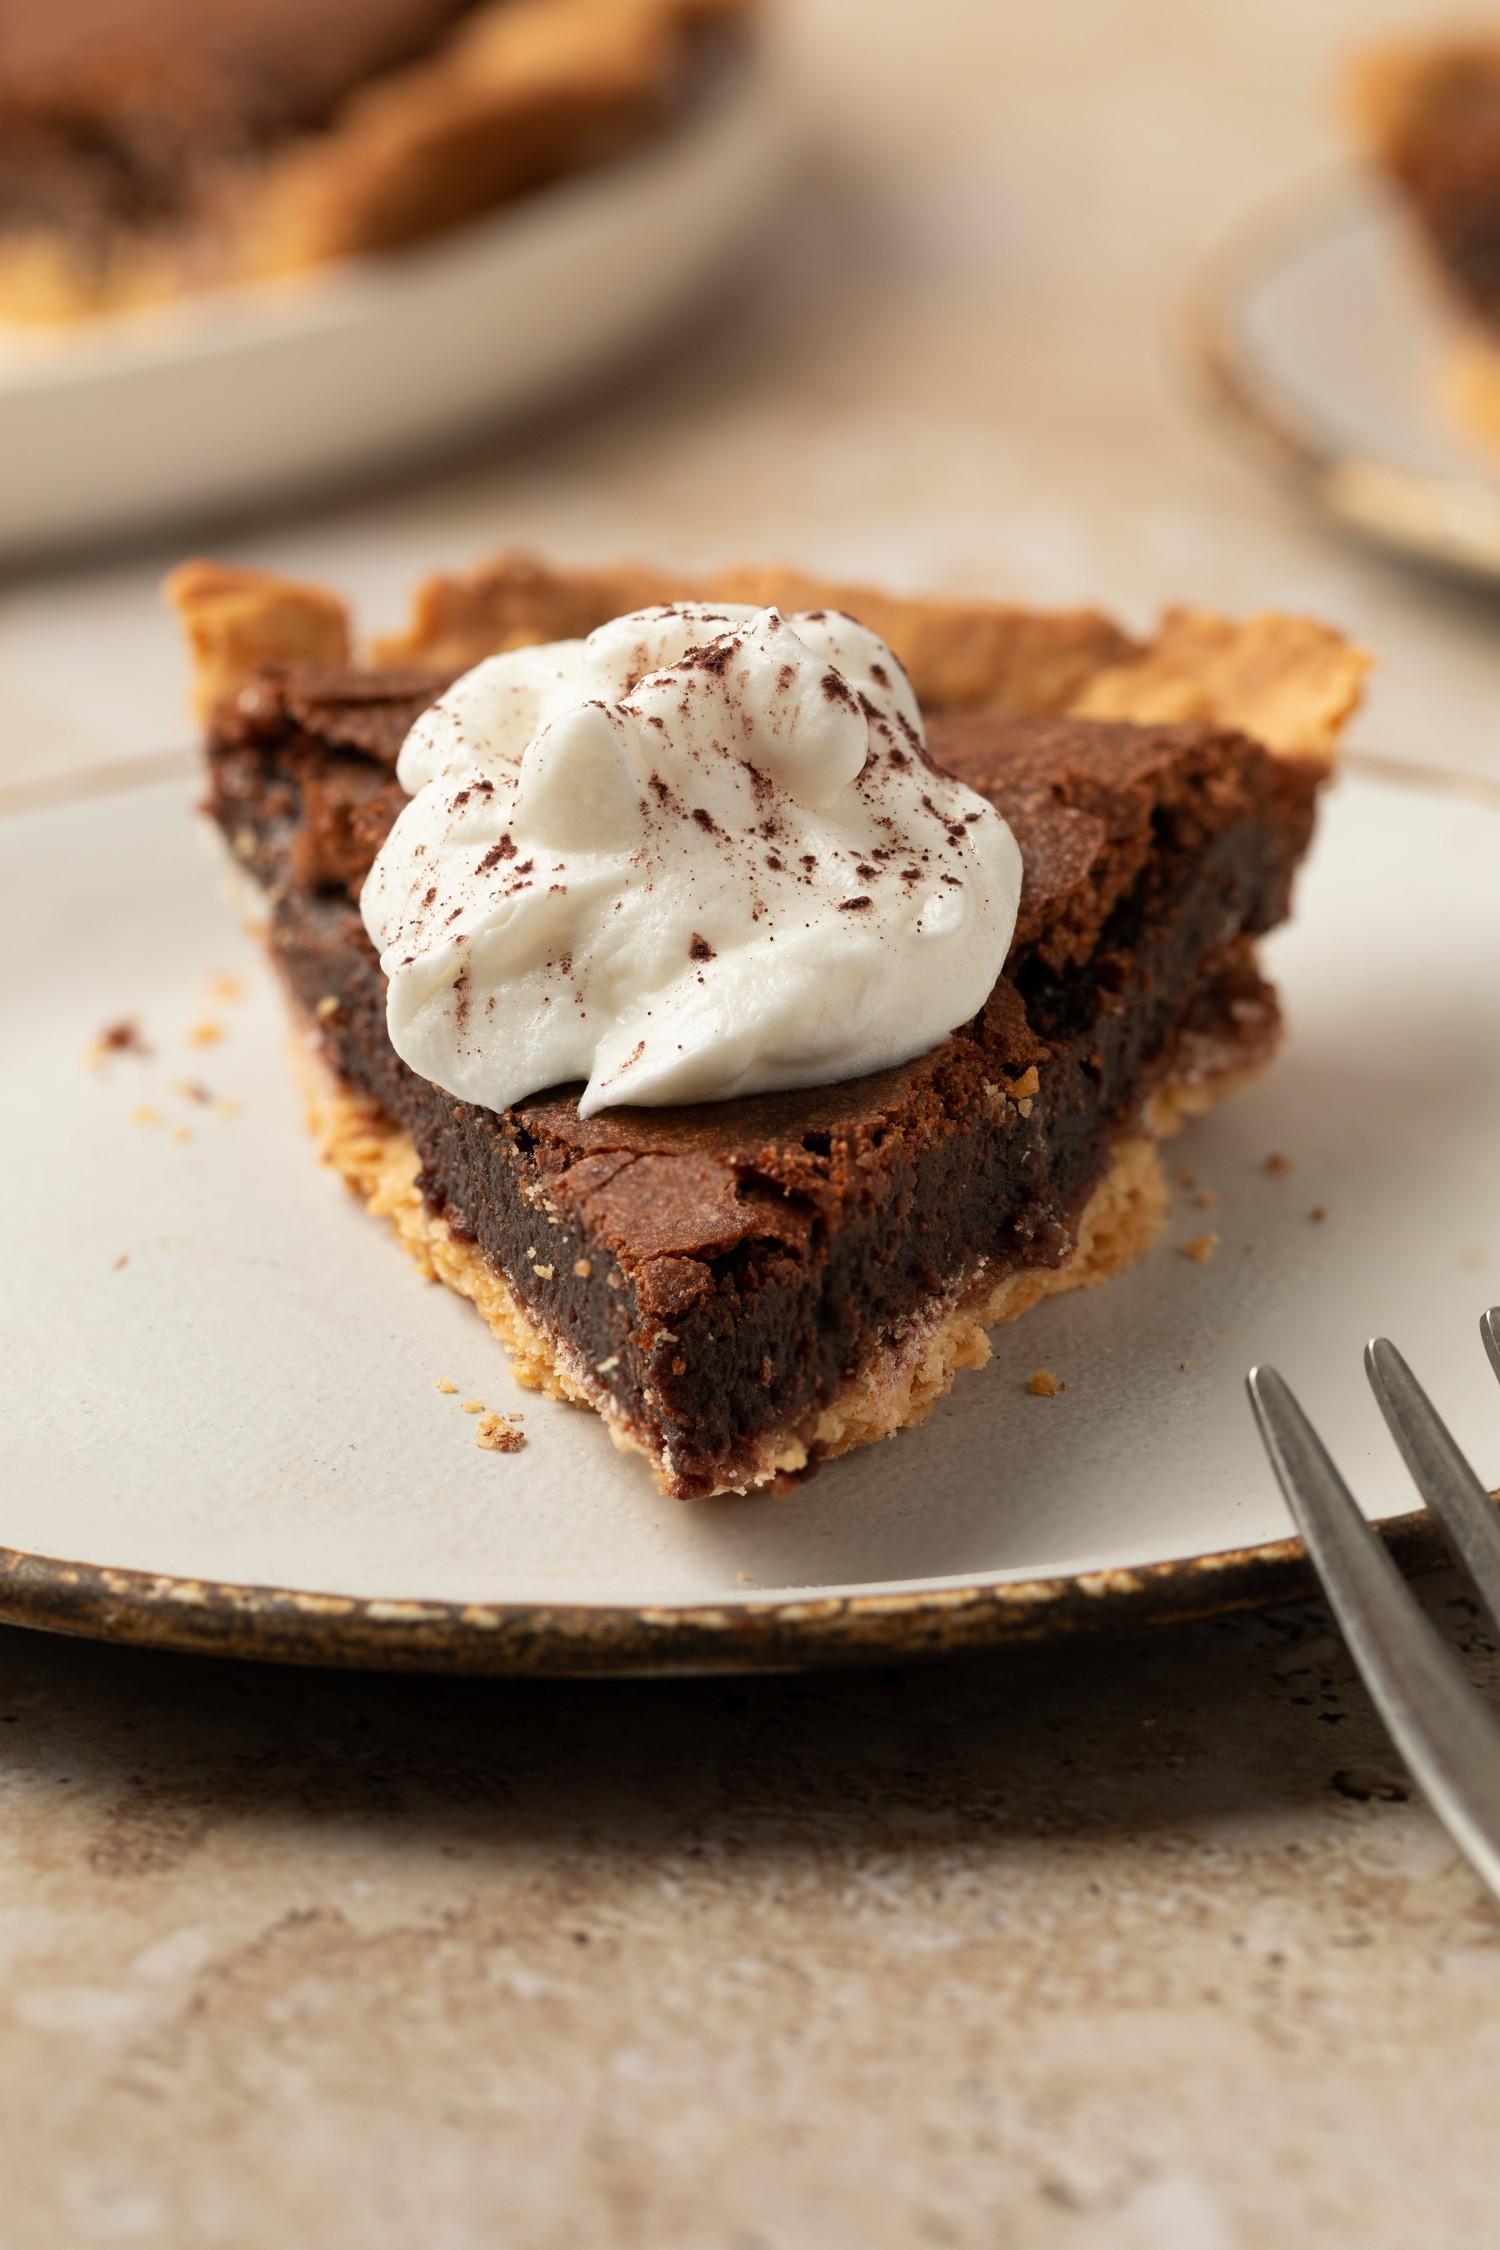 Three quarter view of a slice of chocolate chess pie with whipped cream on top